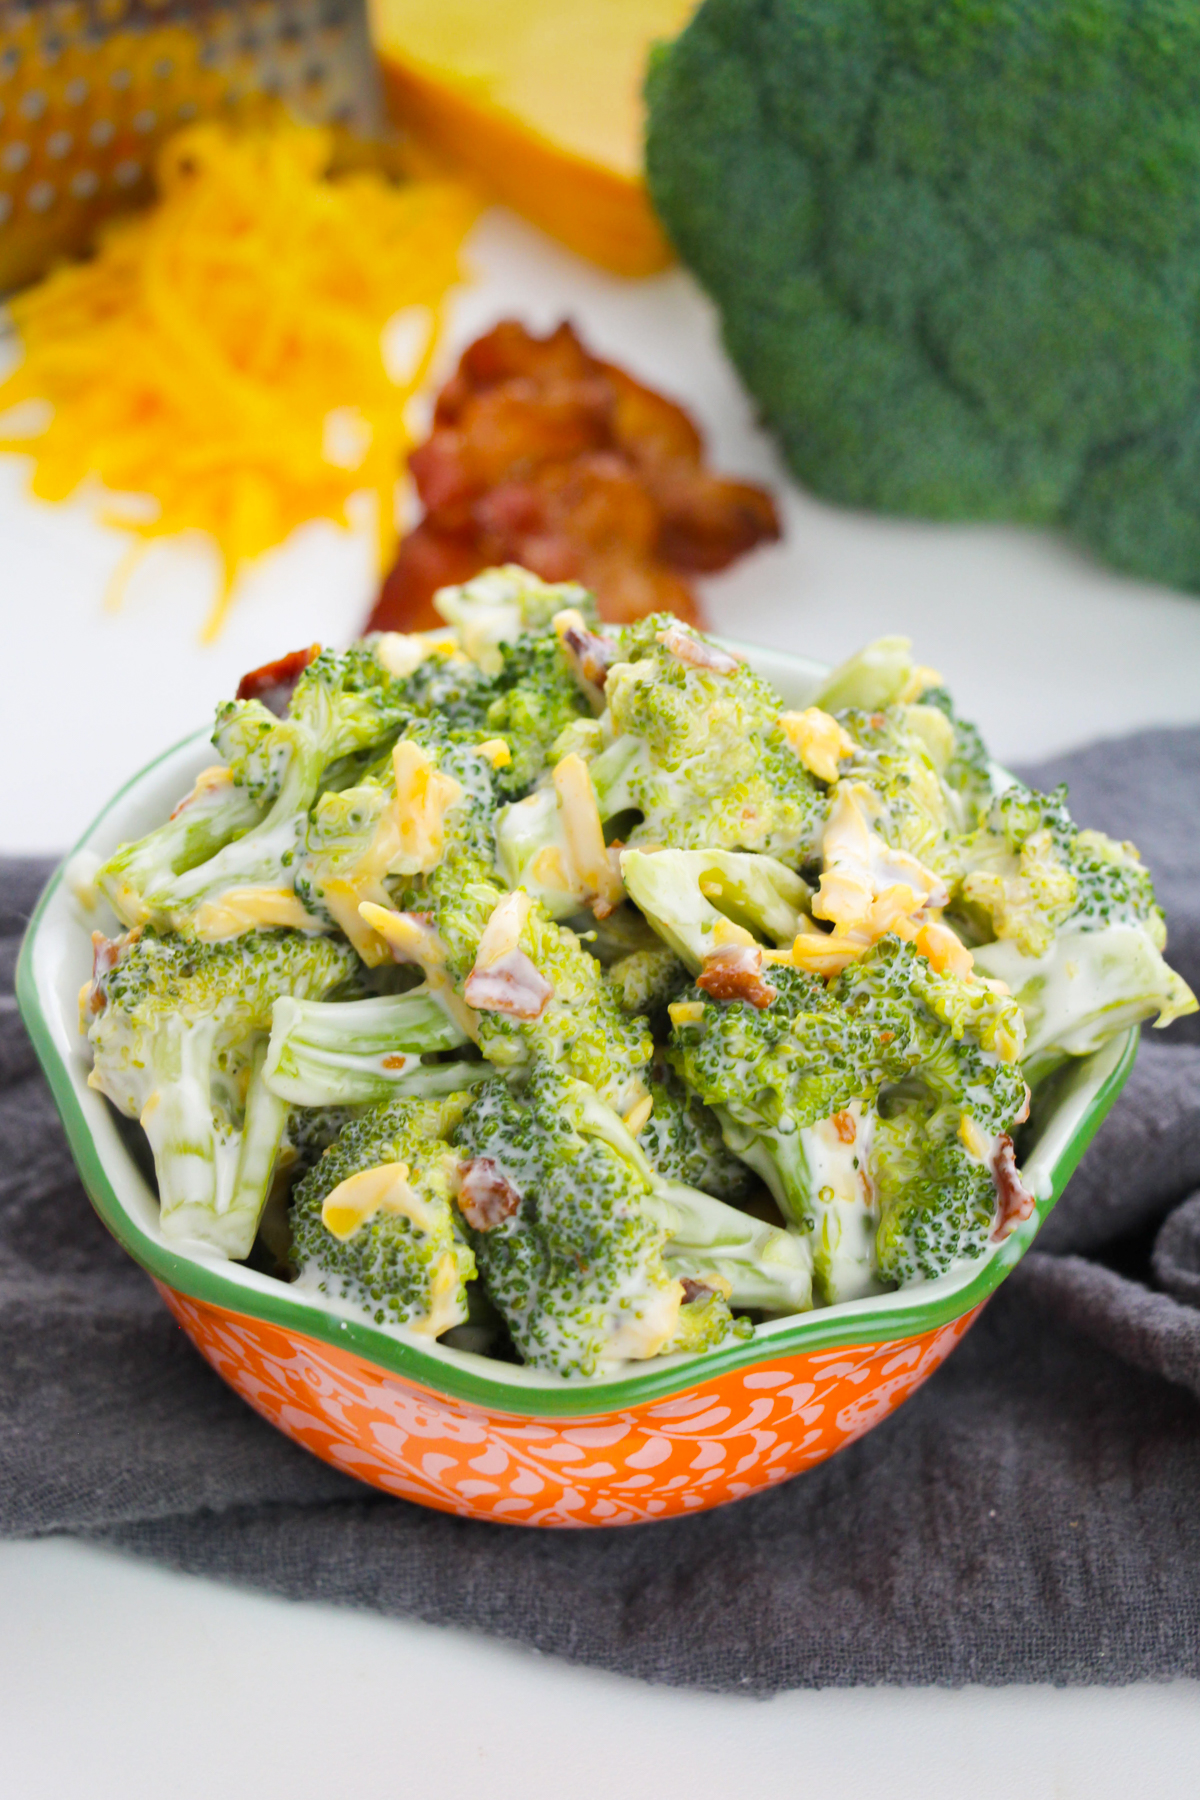 Broccoli salad with bacon and cheddar cheese in orange and green serving bowl.